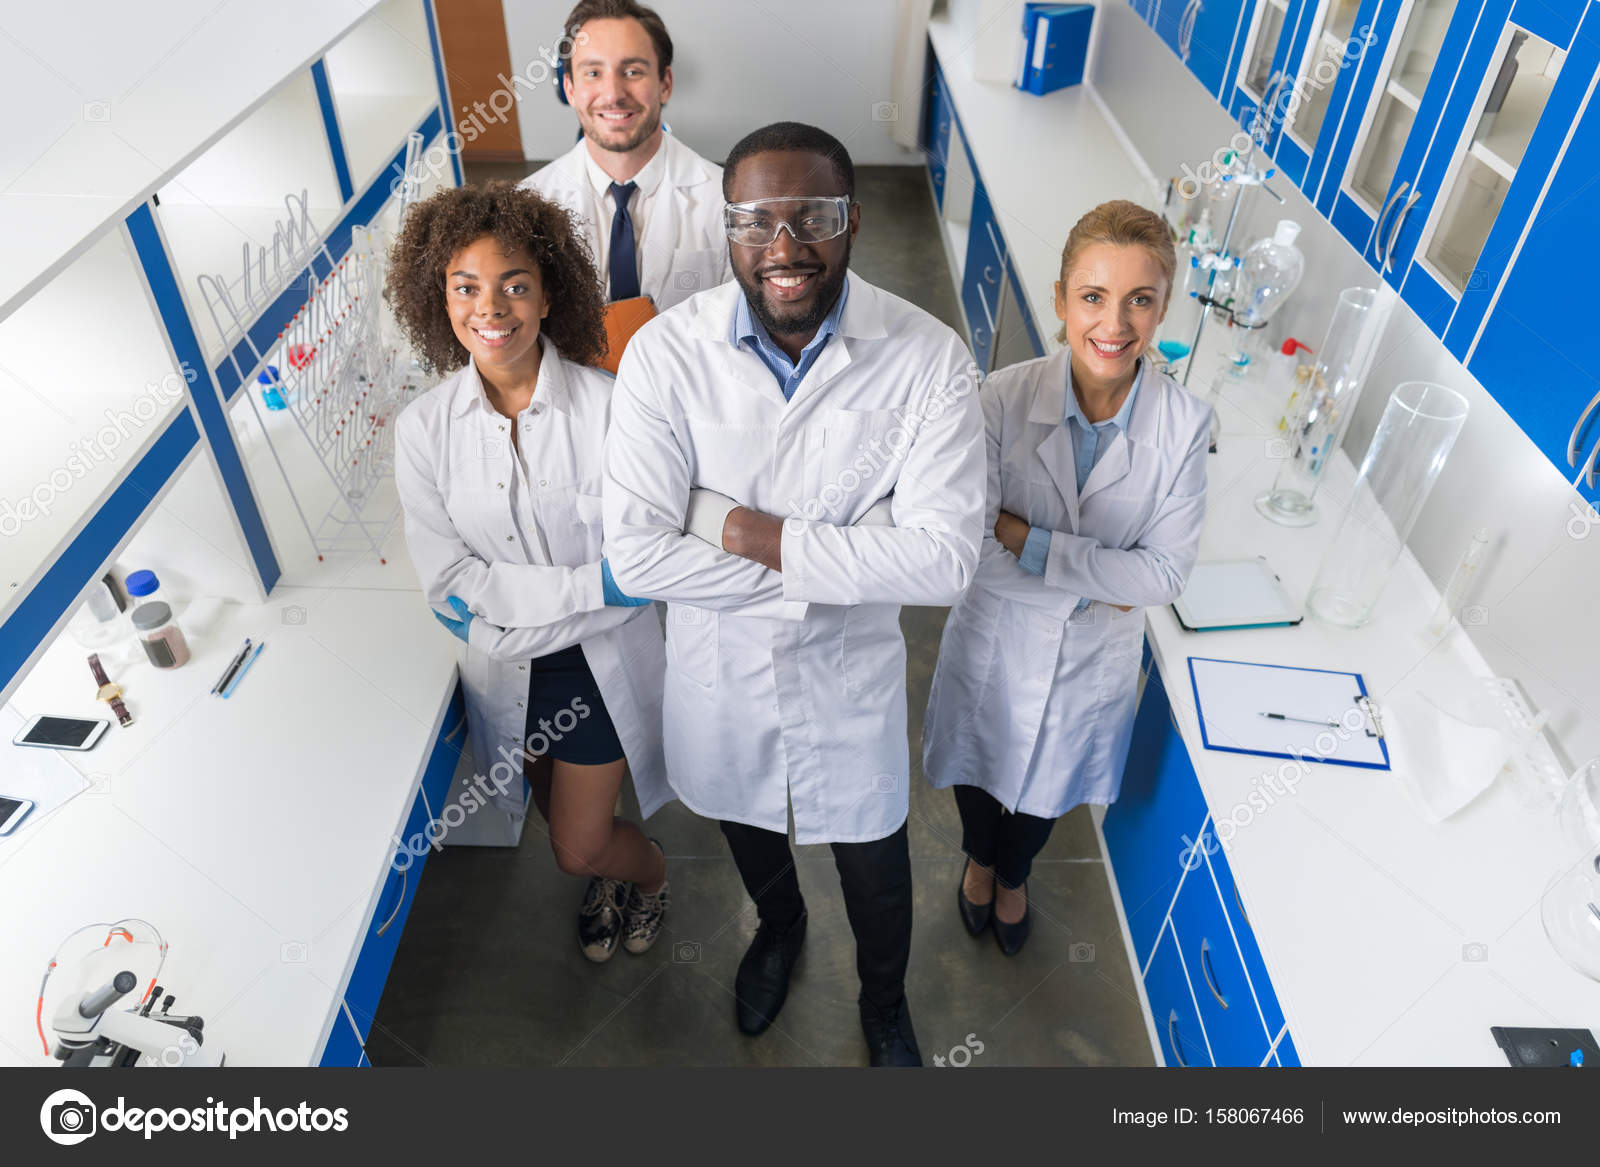 depositphotos_158067466-stock-photo-african-american-scientist-with-group.jpg